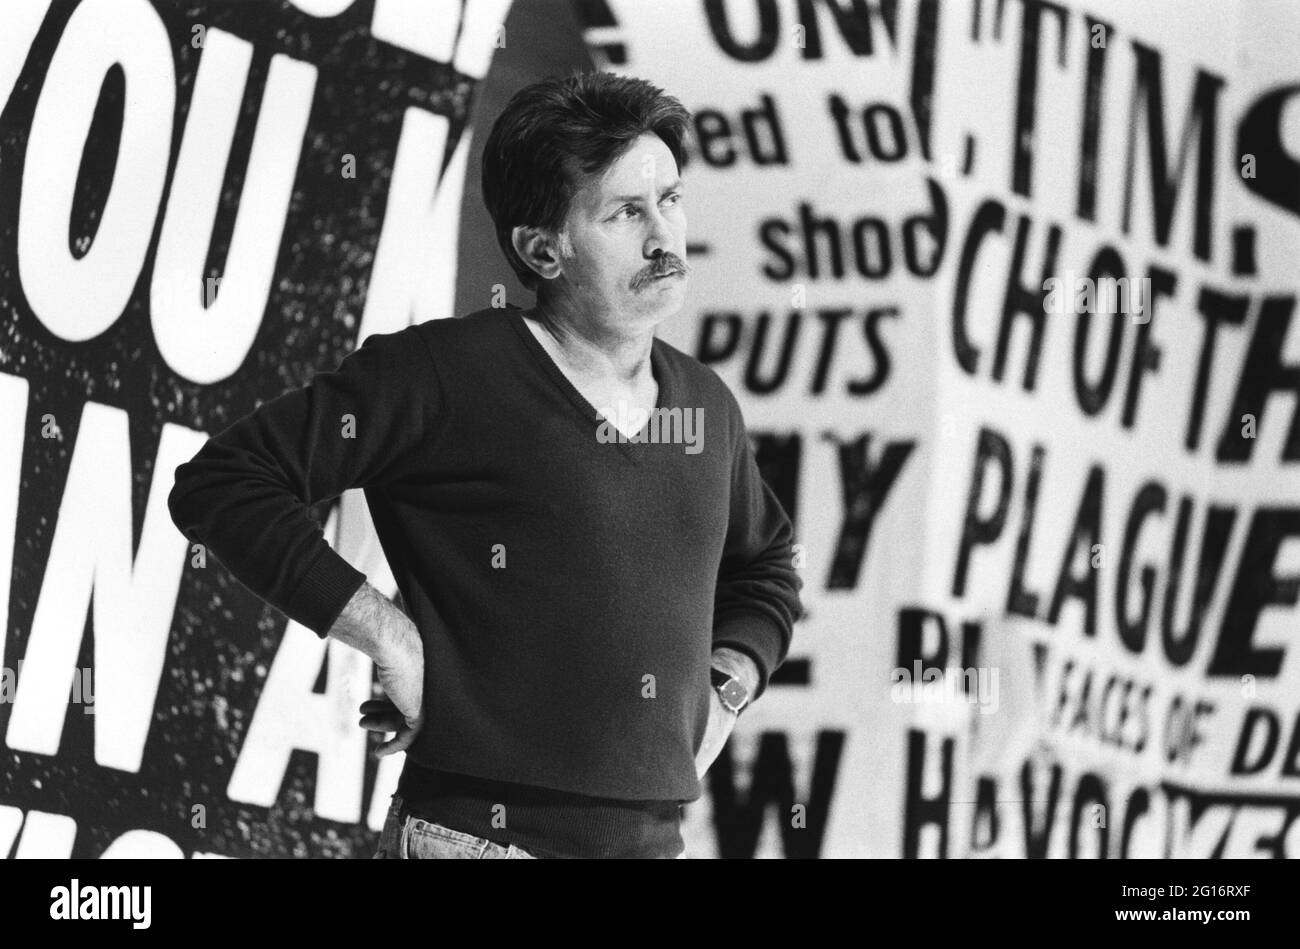 Martin Sheen (Ned Weeks) in THE NORMAL HEART by Larry Kramer at the Royal Court Theatre, London SW1 20/03/1986  design: Geoff Rose  lighting: Gerry Jenkinson  director: David Hayman Stock Photo